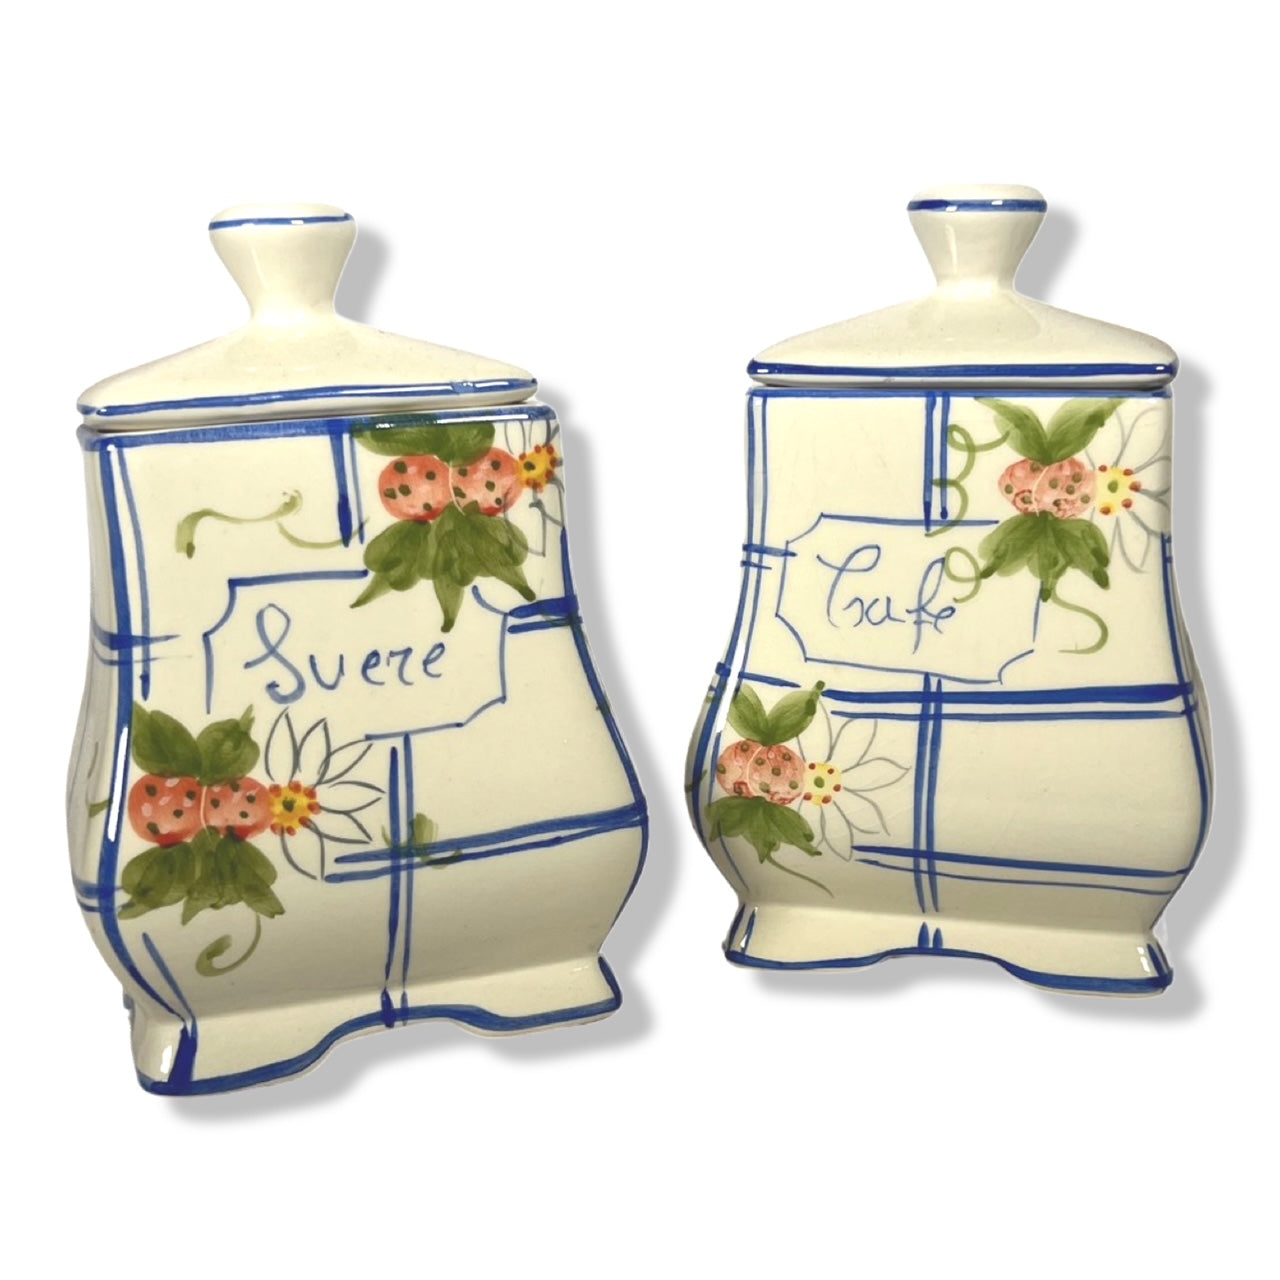 19th C. Parisienne Hand-Painted Porcelain 'Cafe & Sucre" (Coffee & Sugar) Canisters